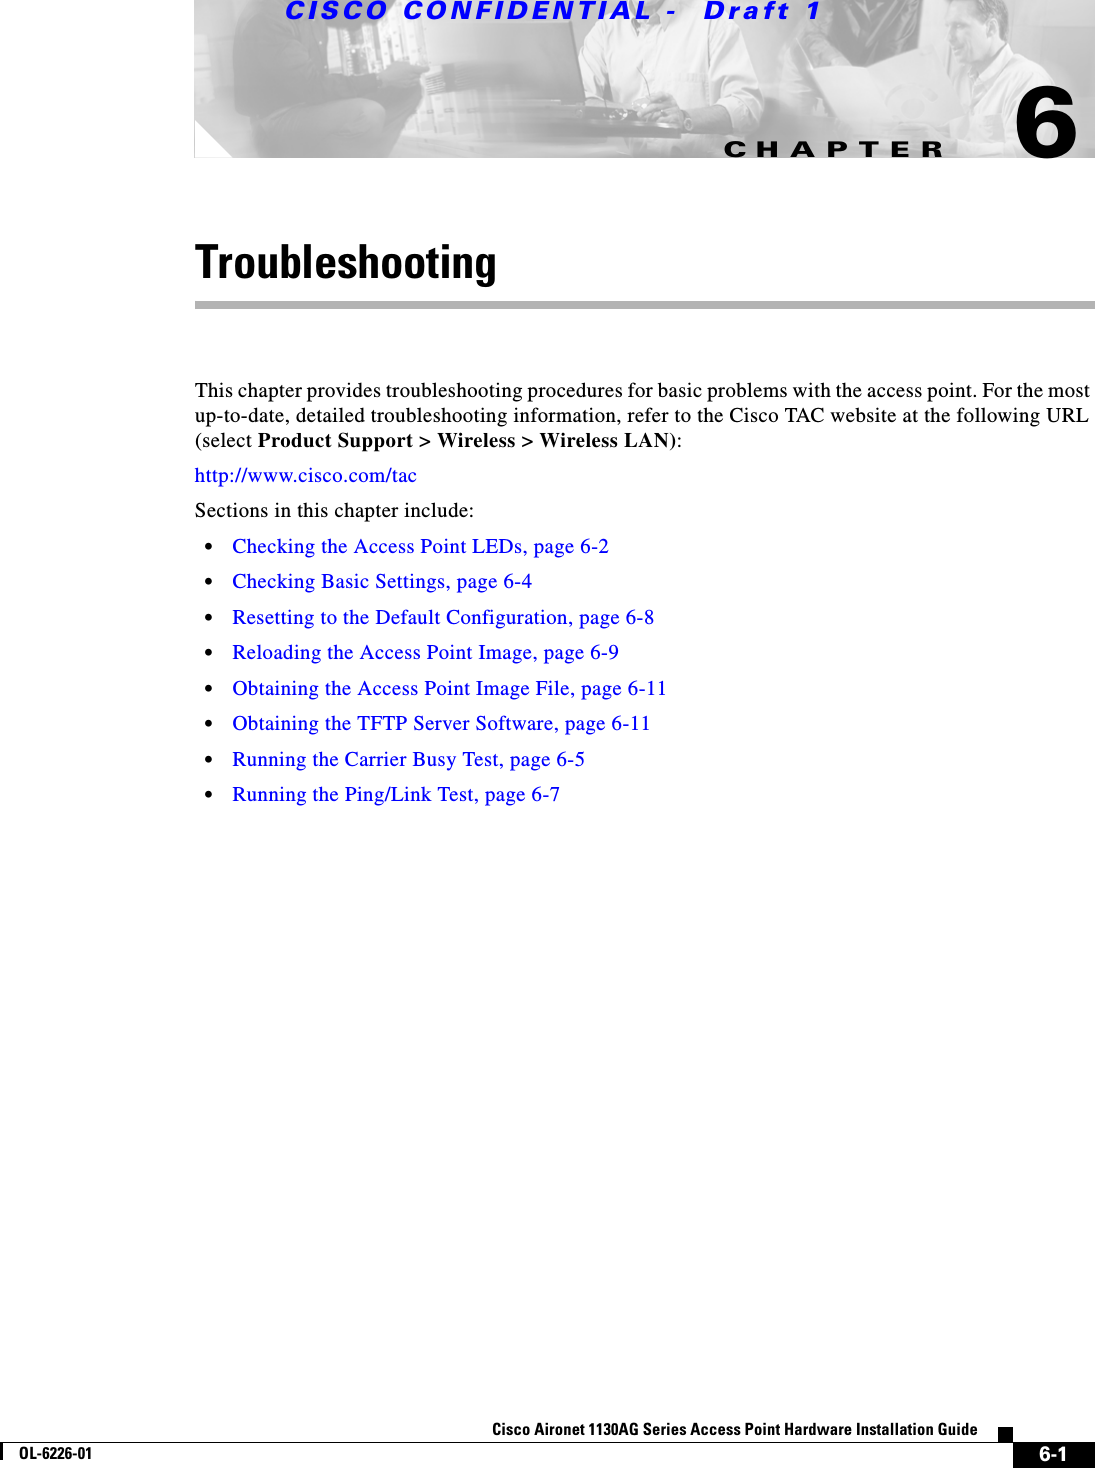 CHAPTER CISCO CONFIDENTIAL -  Draft 16-1Cisco Aironet 1130AG Series Access Point Hardware Installation GuideOL-6226-016TroubleshootingThis chapter provides troubleshooting procedures for basic problems with the access point. For the most up-to-date, detailed troubleshooting information, refer to the Cisco TAC website at the following URL (select Product Support &gt; Wireless &gt; Wireless LAN):http://www.cisco.com/tac Sections in this chapter include:•Checking the Access Point LEDs, page 6-2•Checking Basic Settings, page 6-4•Resetting to the Default Configuration, page 6-8•Reloading the Access Point Image, page 6-9•Obtaining the Access Point Image File, page 6-11•Obtaining the TFTP Server Software, page 6-11•Running the Carrier Busy Test, page 6-5•Running the Ping/Link Test, page 6-7